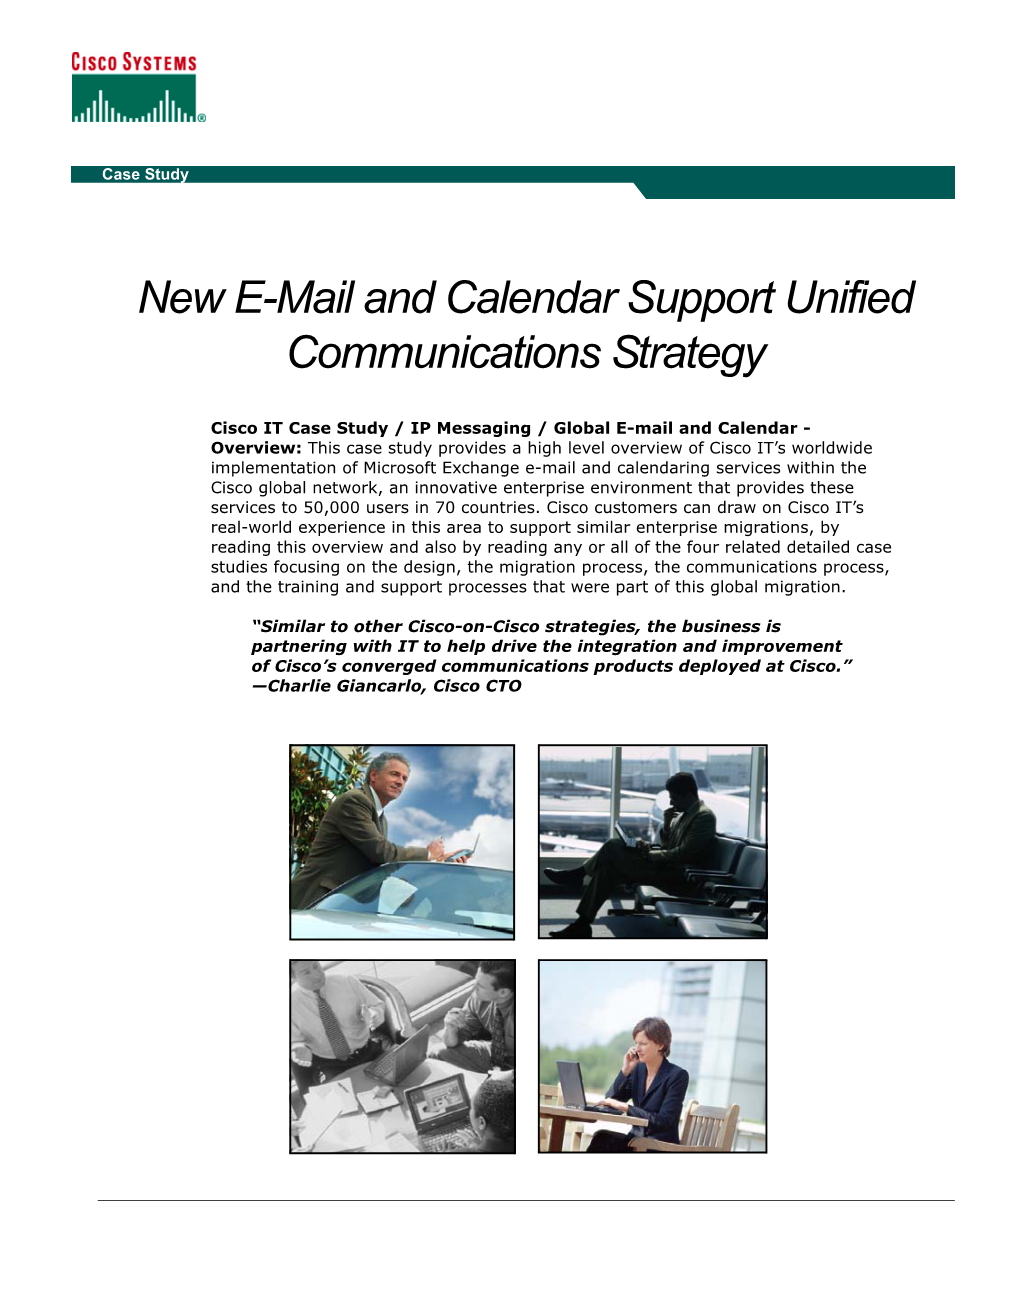 New E-Mail and Calendar Support Unified Communications Strategy